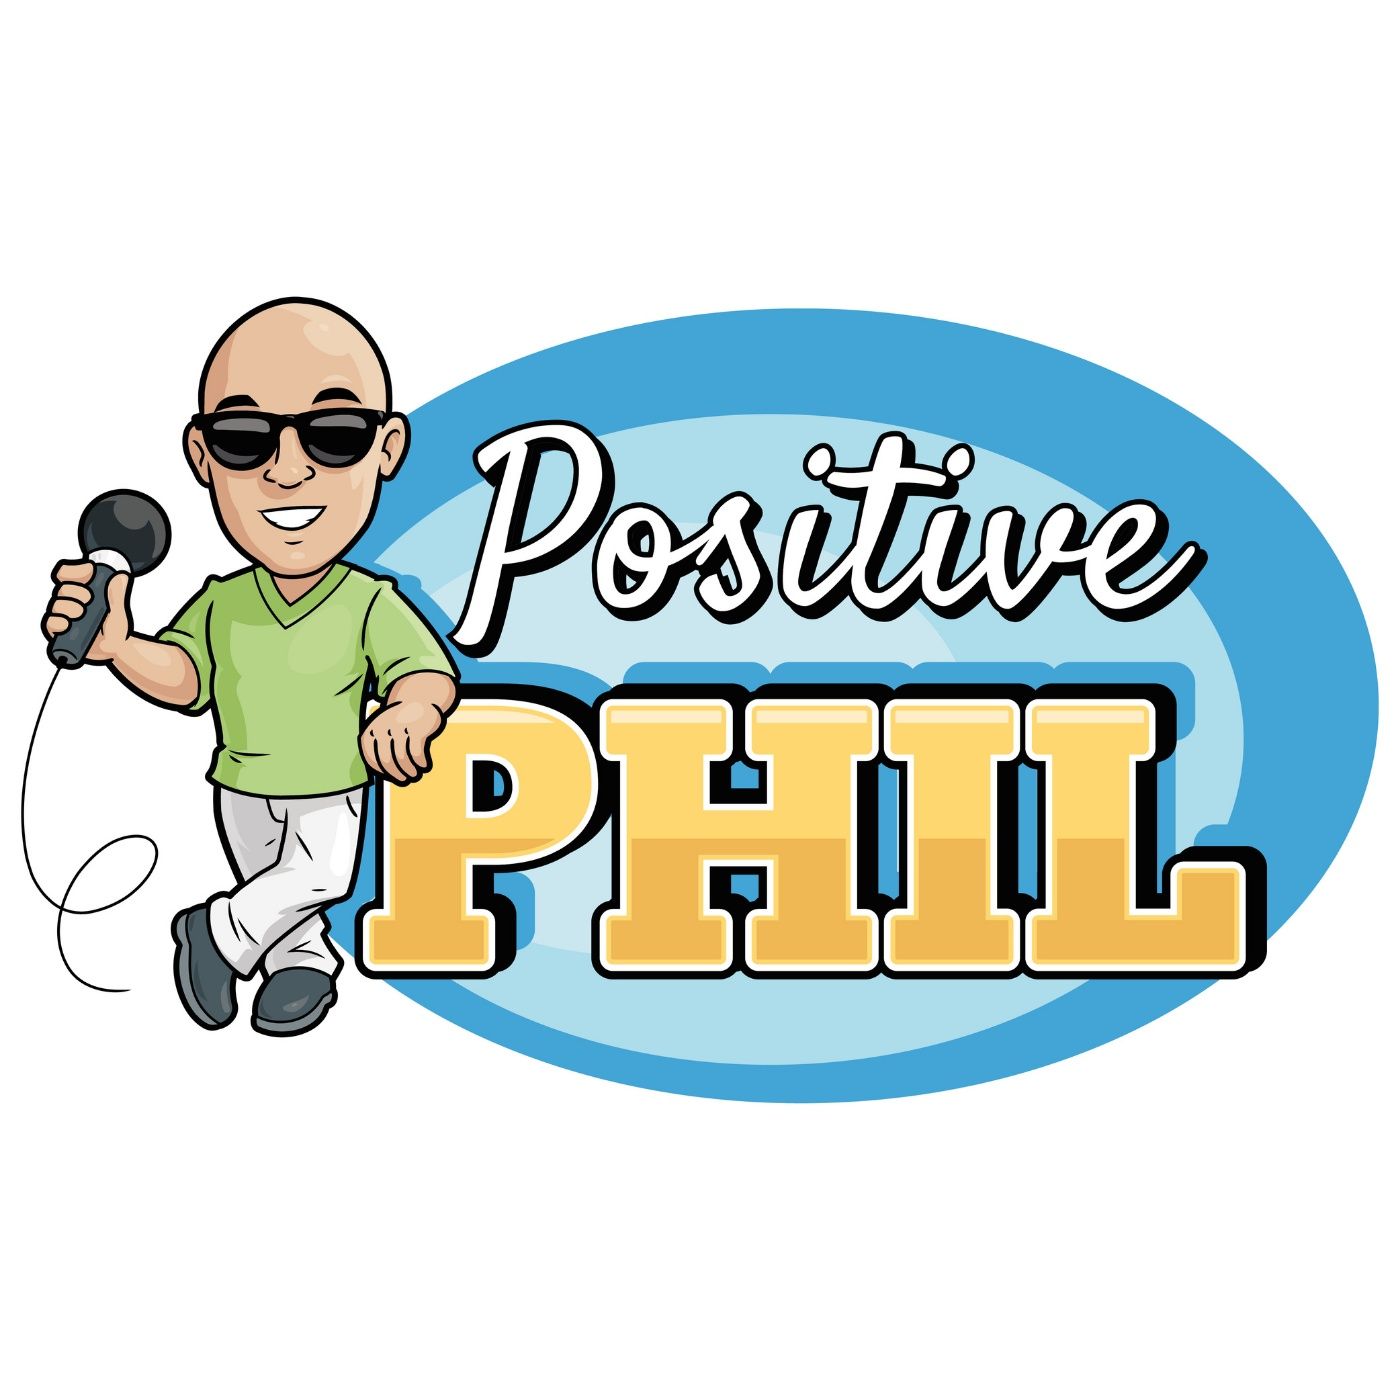 Anthony Denier CEO of WEBULL.COM, a Commission Free Trading Platform with 10M Users/Investors is on the Positive Phil Show